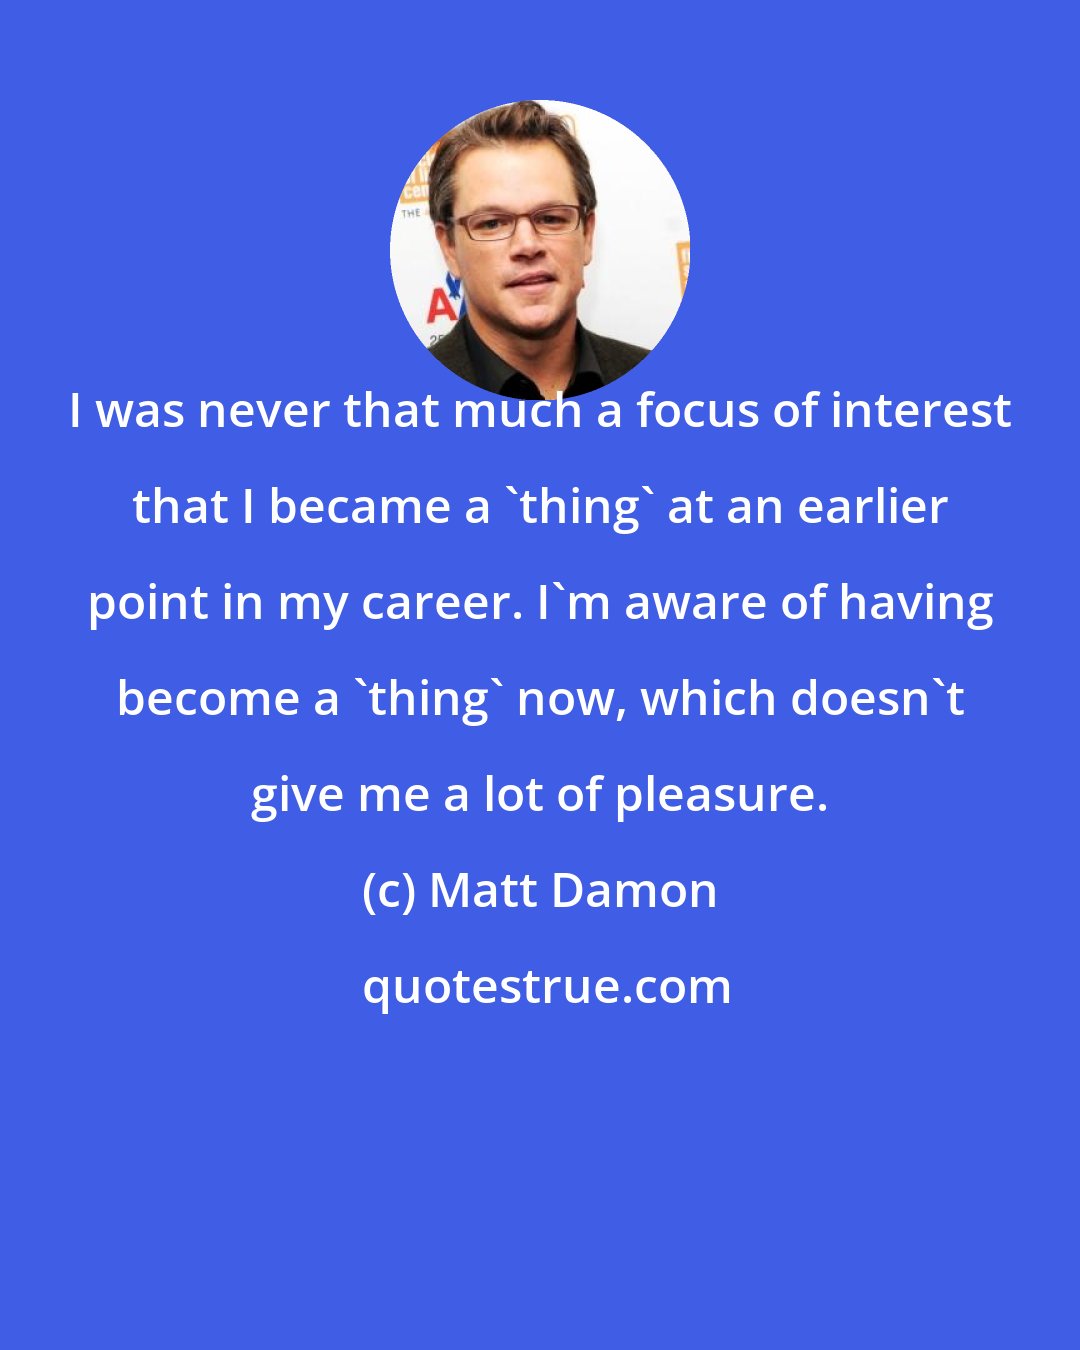 Matt Damon: I was never that much a focus of interest that I became a 'thing' at an earlier point in my career. I'm aware of having become a 'thing' now, which doesn't give me a lot of pleasure.